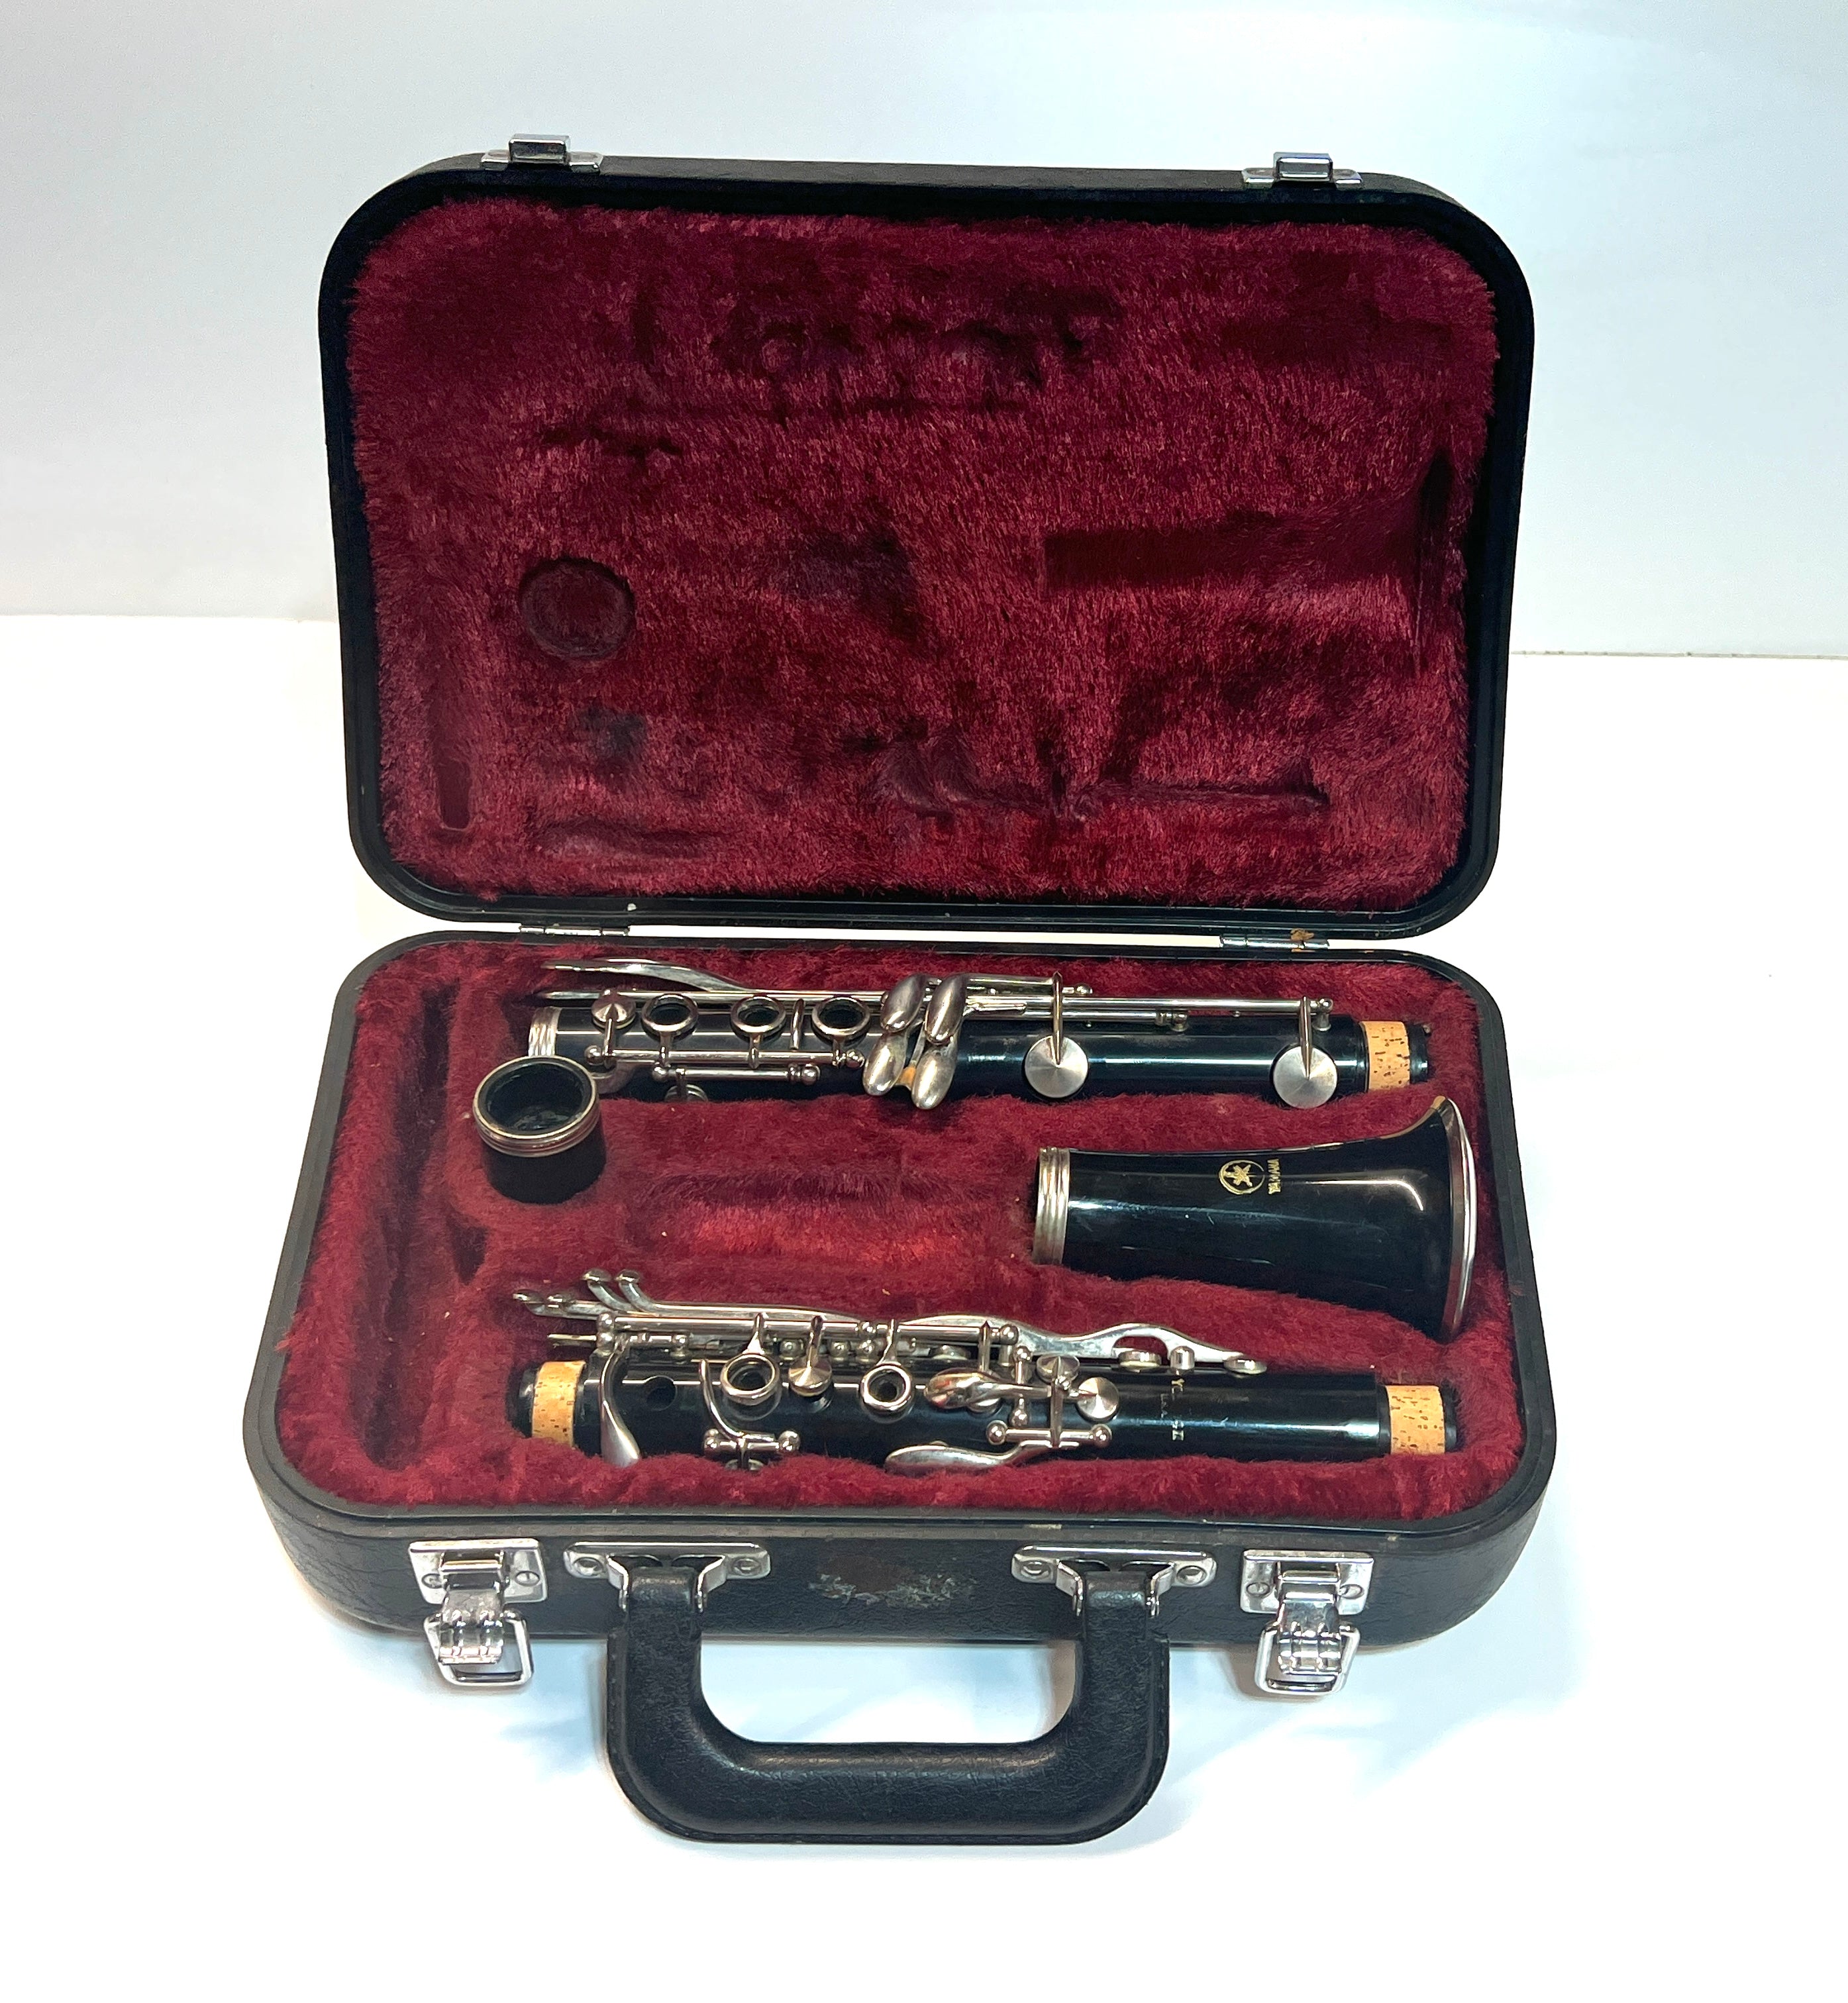 Yamaha YCL-24II Clarinet New Cork Recently Serviced Plays Well w/case USED